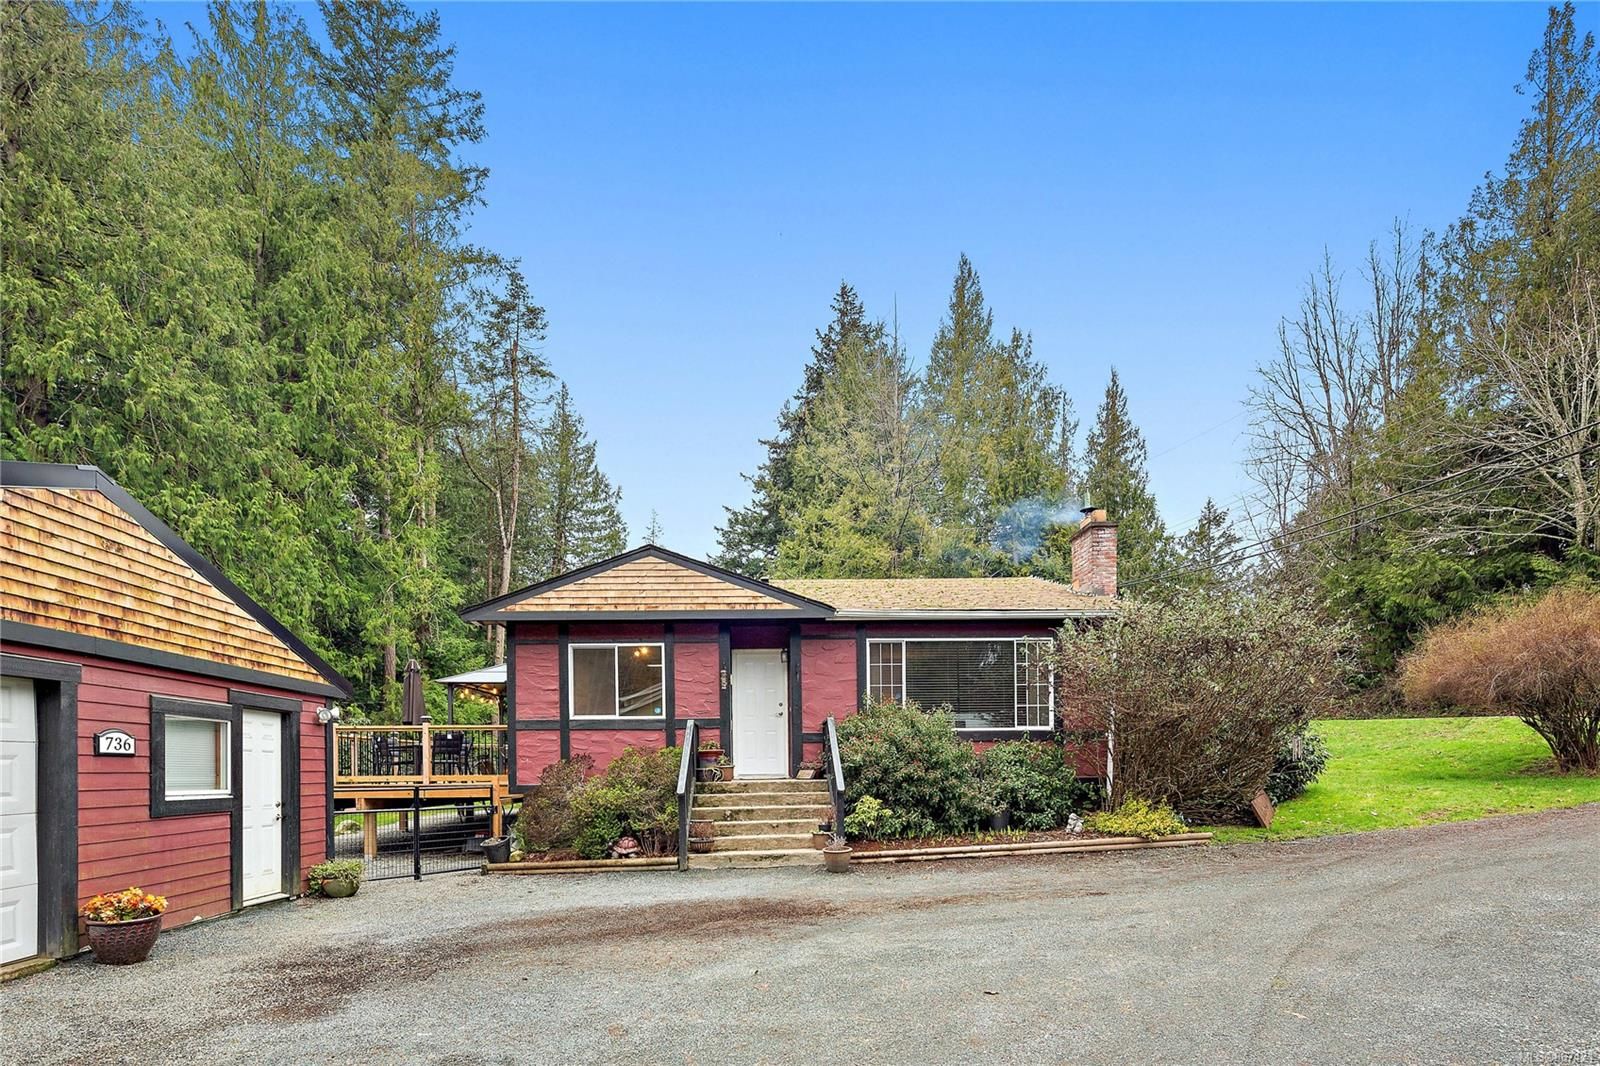 I have sold a property at 736 Tiswilde Rd in Metchosin
